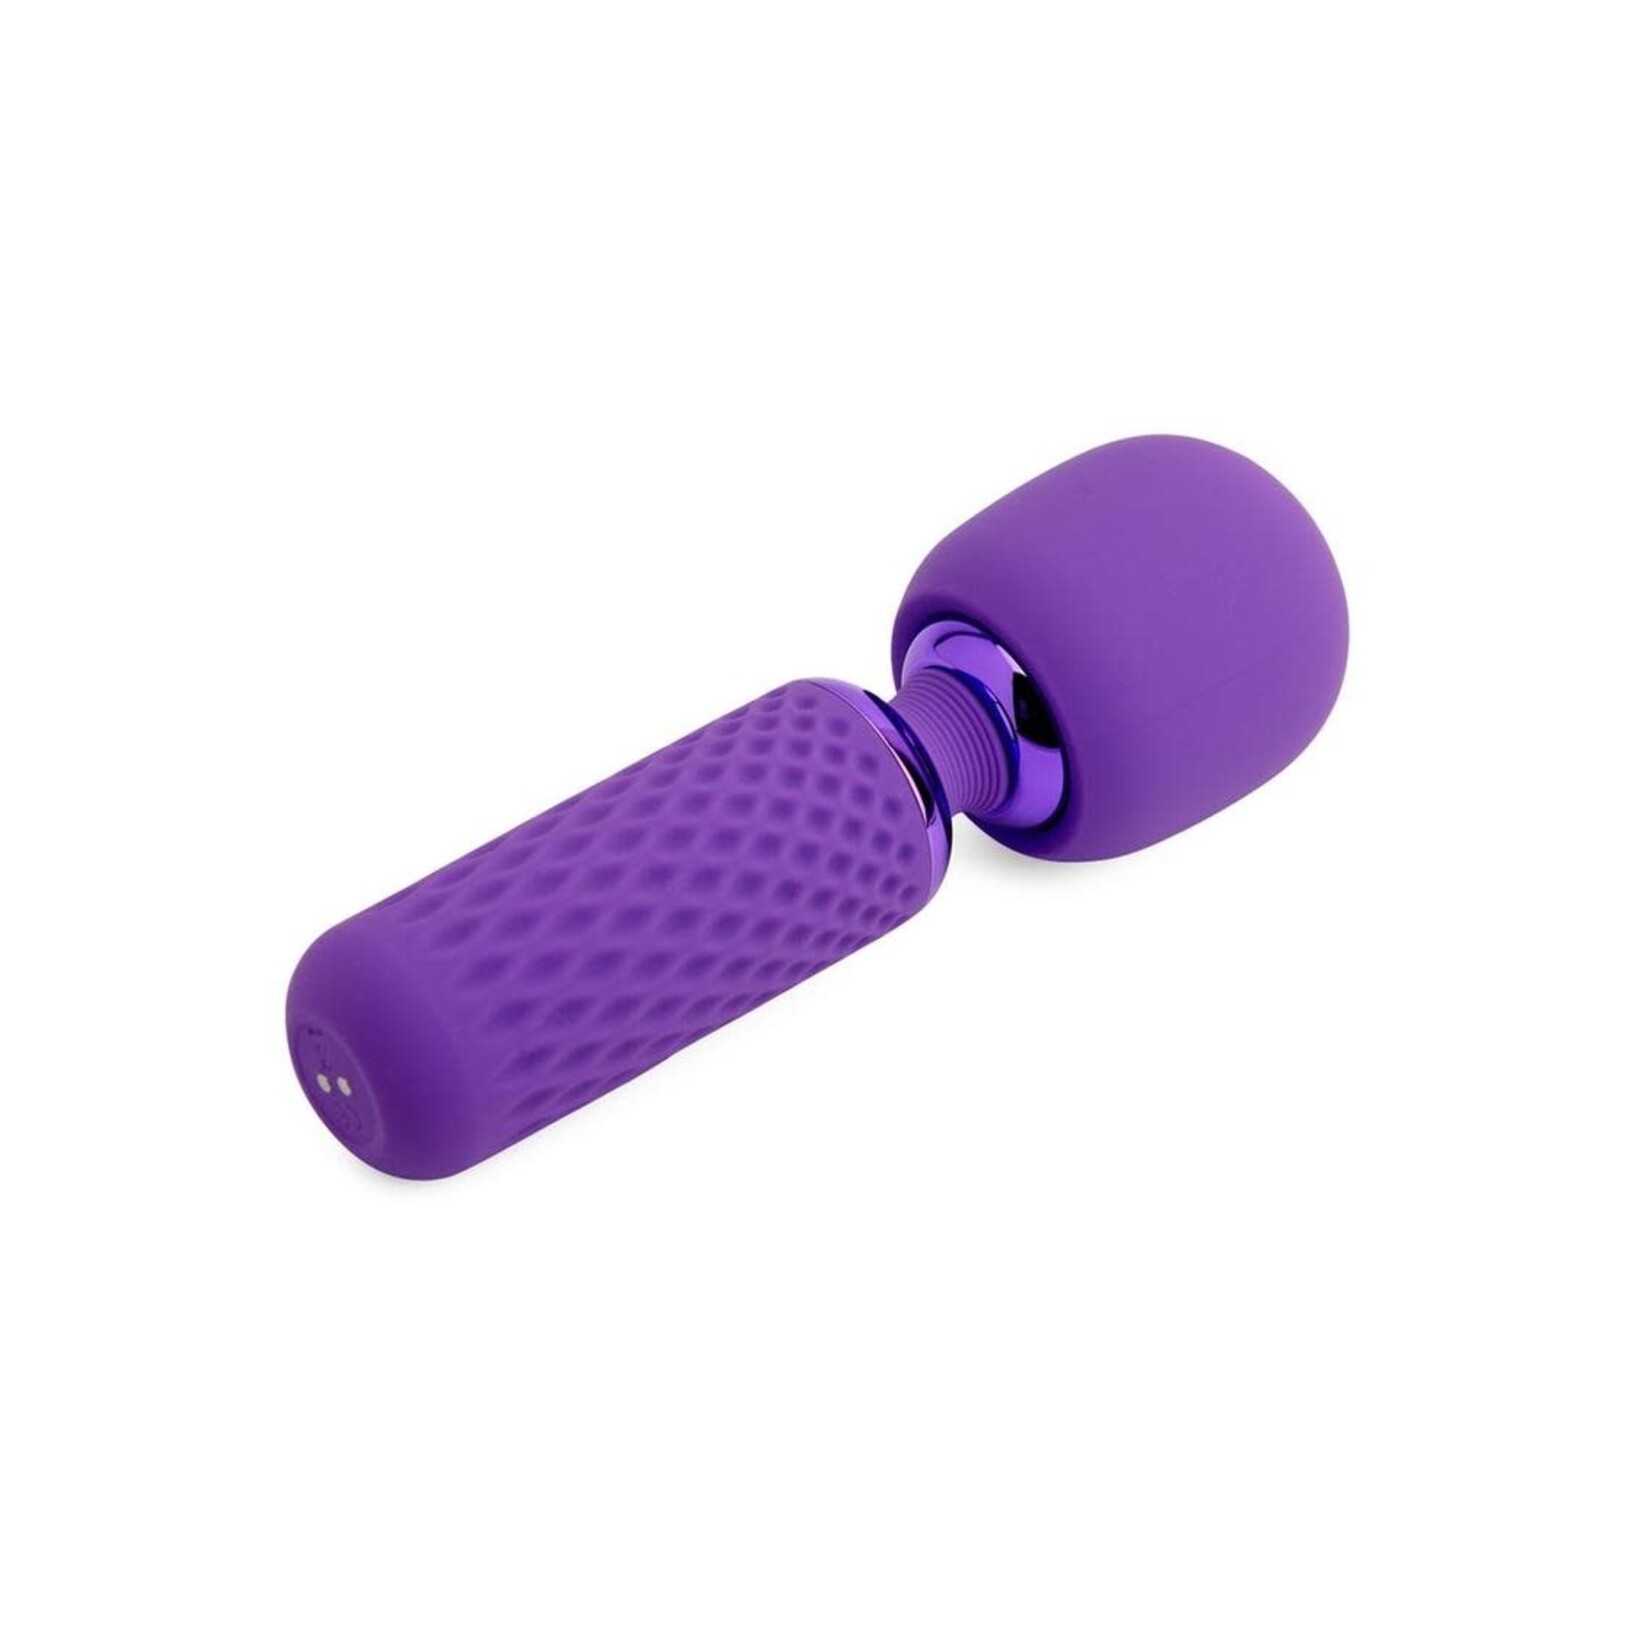 Nu Sensuelle Harlow Nubii Rechargeable Silicone Mini Heating Wand with Attachment - Purple